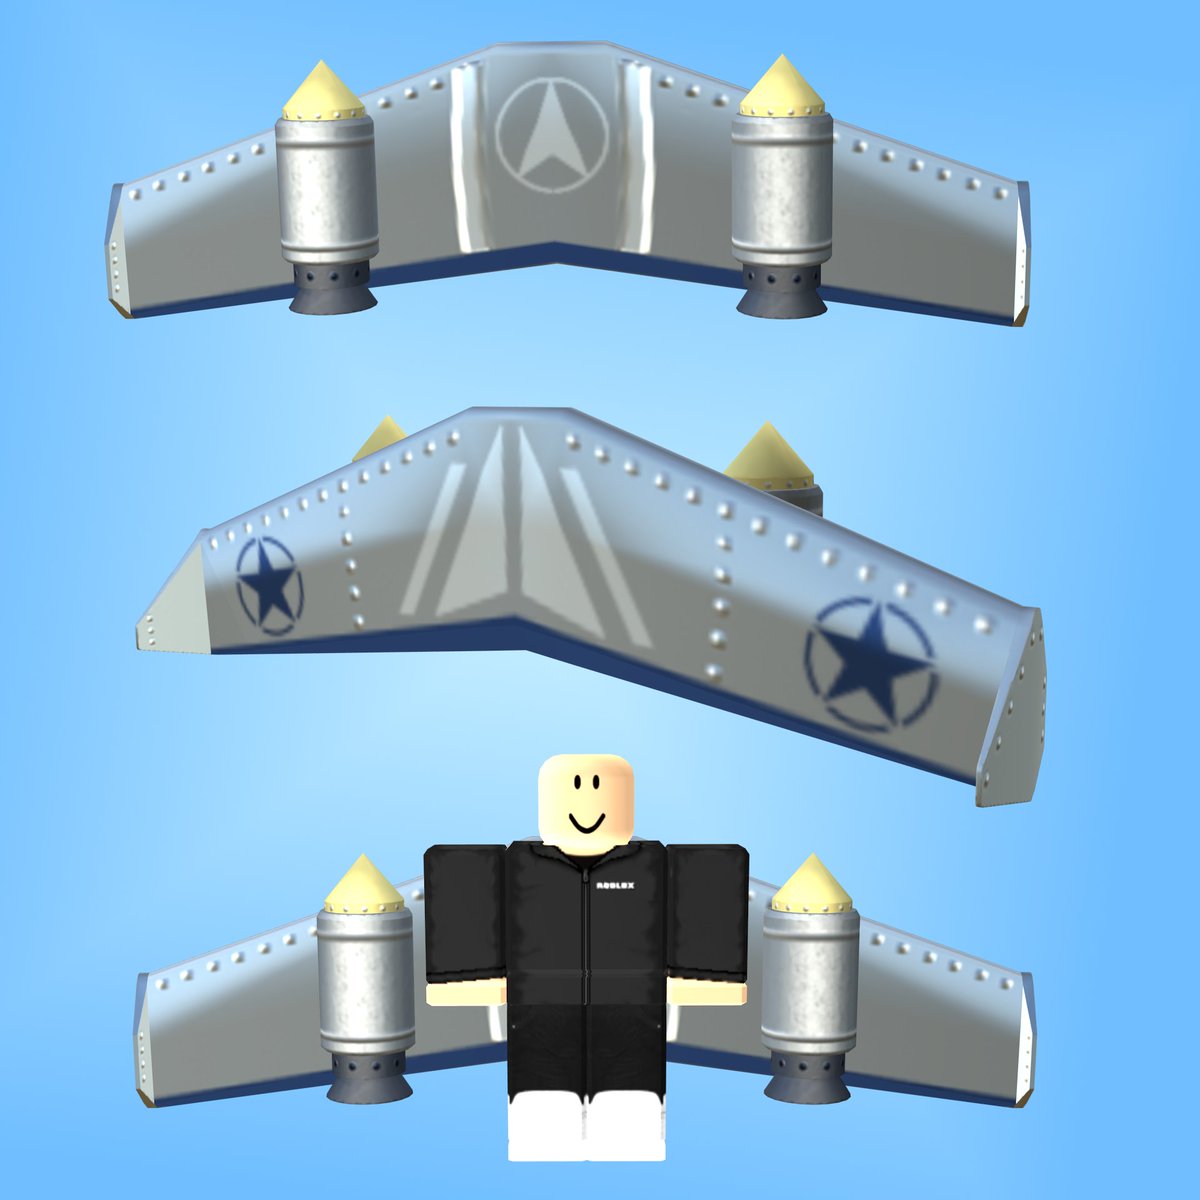 Simon On Twitter Is It A Bird Is It A Plane Introducing The Jet Powered Wingpack Available In Metallic Silver And Jet Black Silver Https T Co Qzihmklmdt Jet Black Https T Co Ozsz5tixz0 Robloxugc Https T Co X0pyeukczo